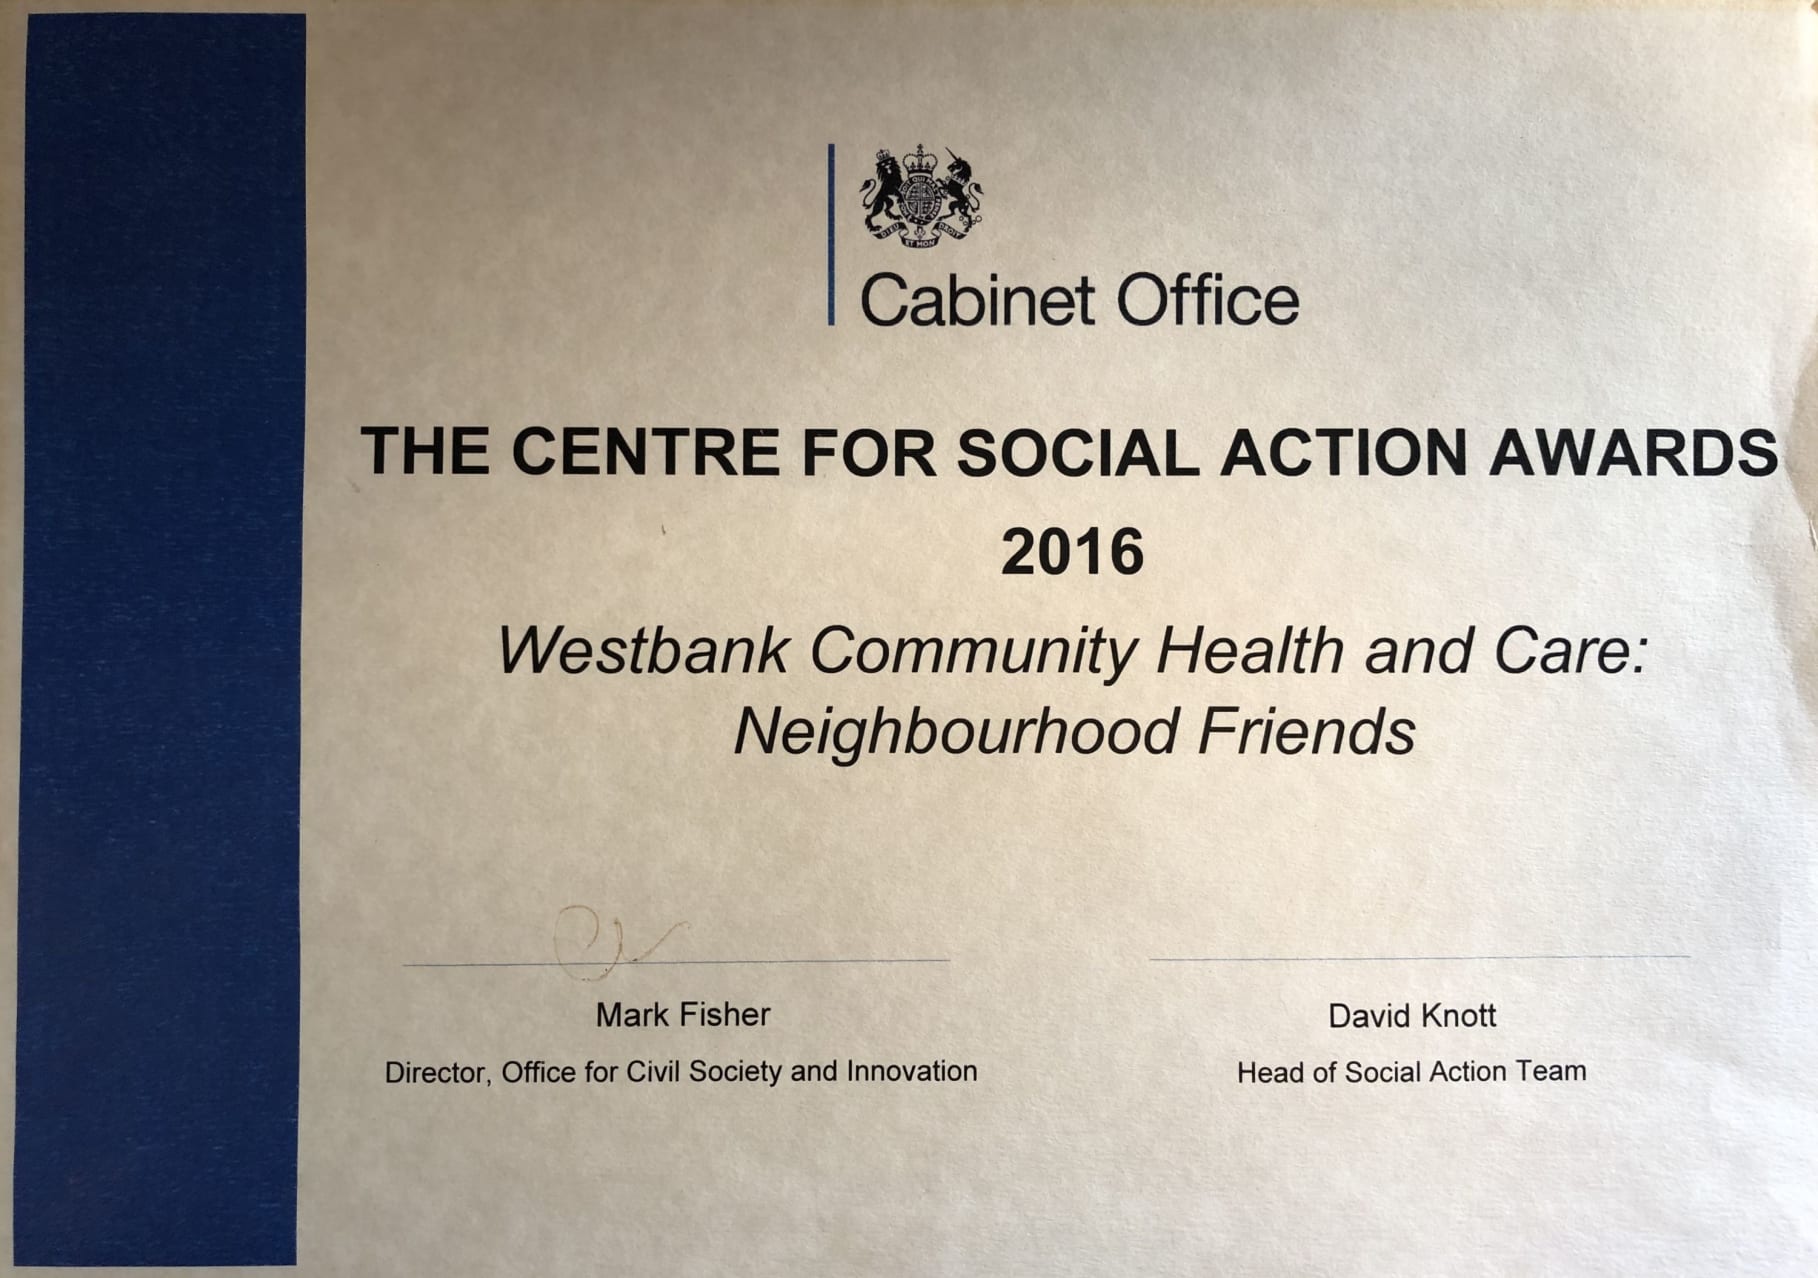 Image: Centre for social action award certificate